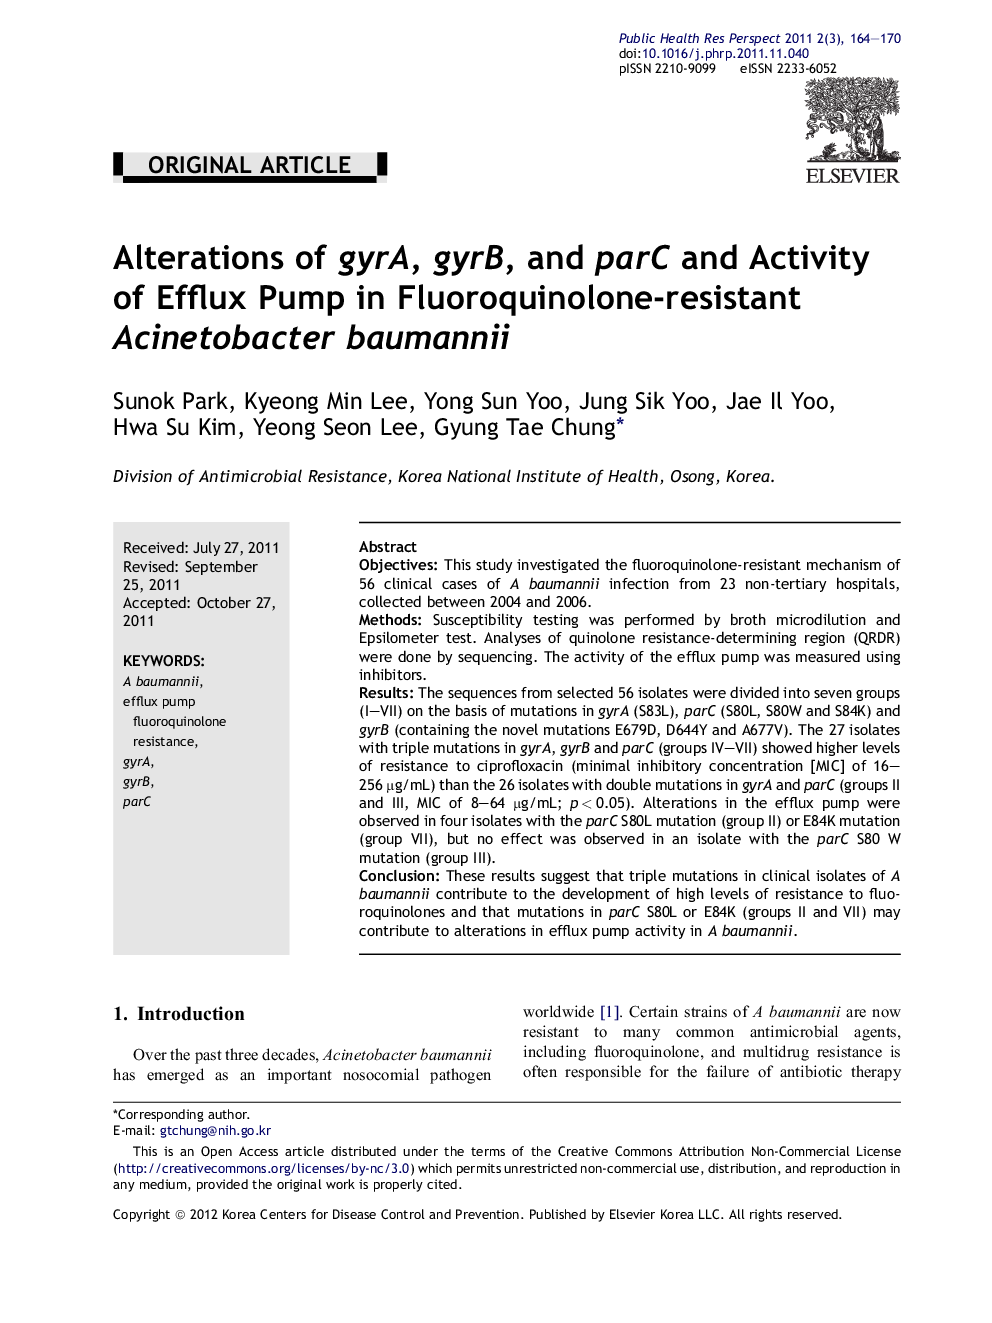 Alterations of gyrA, gyrB, and parC and Activity of Efflux Pump in Fluoroquinolone-resistant Acinetobacter baumannii 